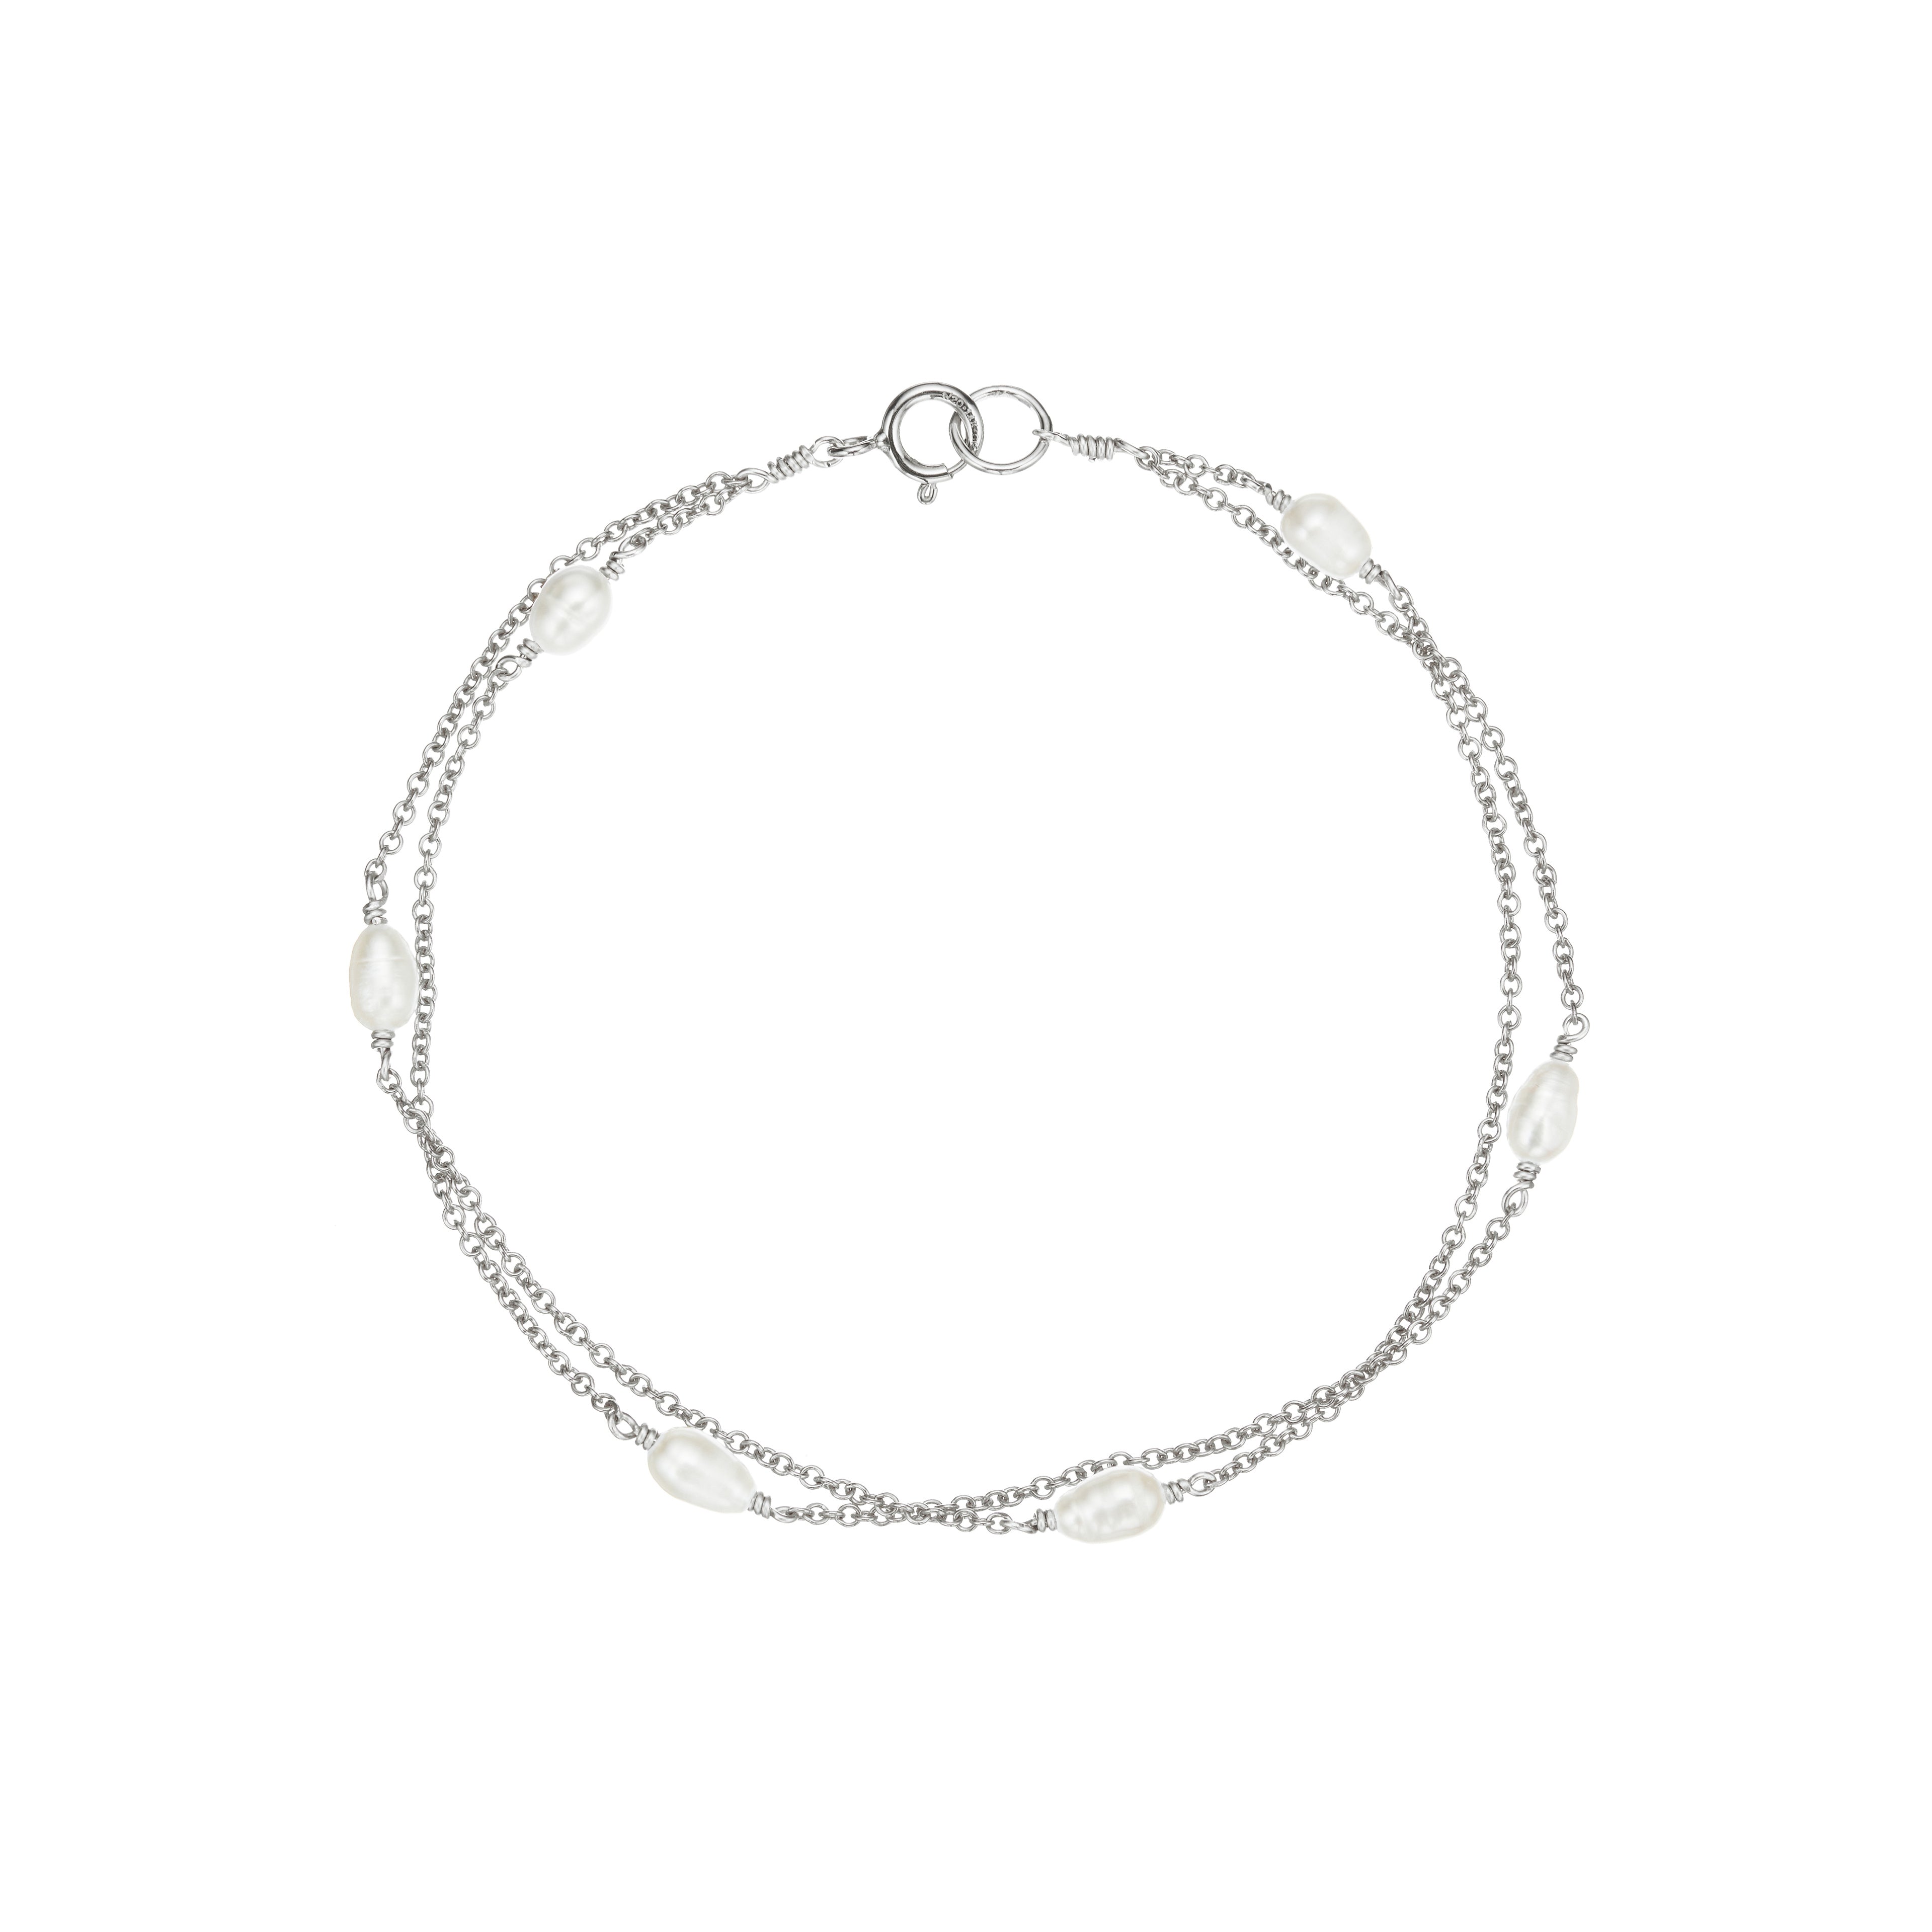 Solid White Gold Layered Seed Pearl Bracelet